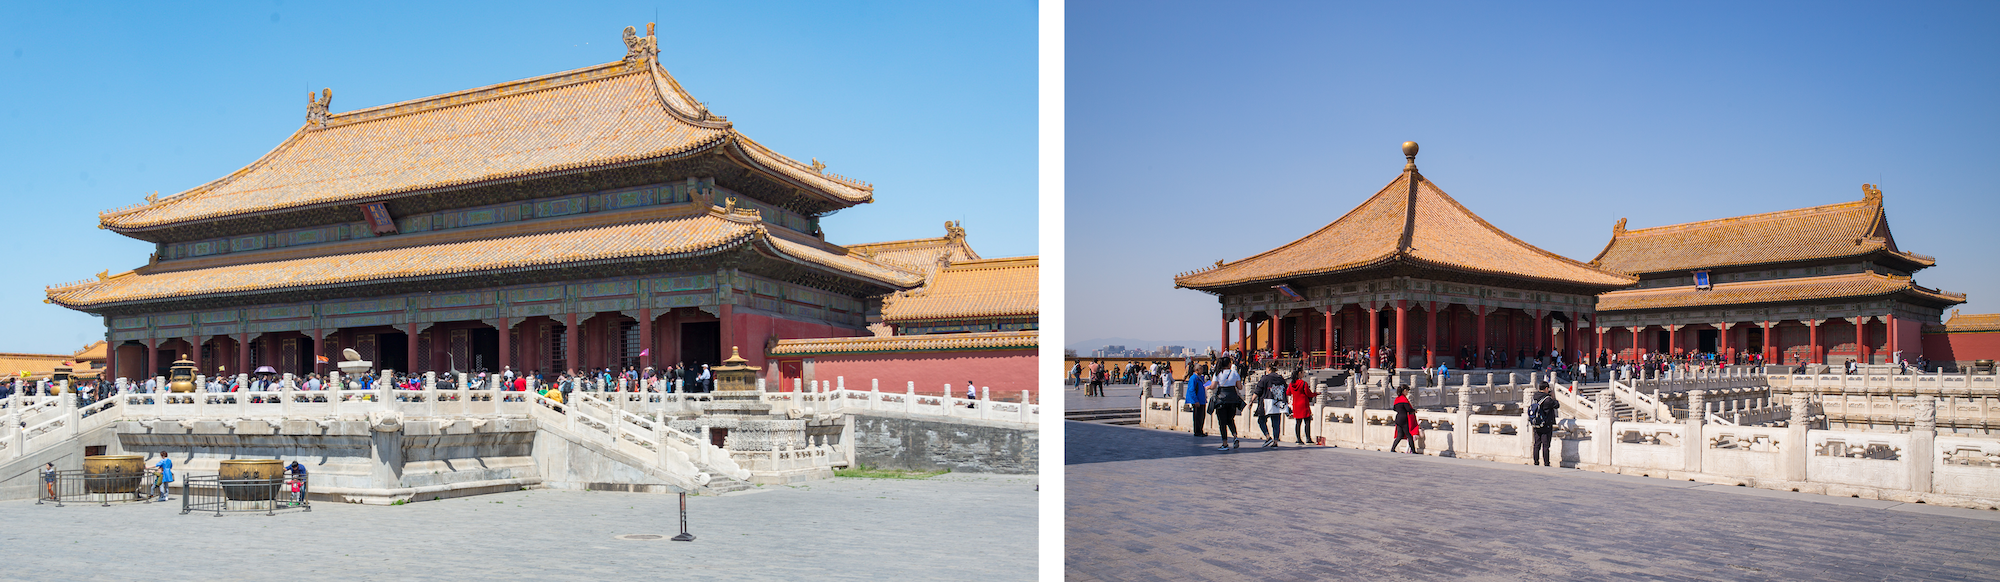 A Wooden Imperial Palace that Defies History: Forbidden City